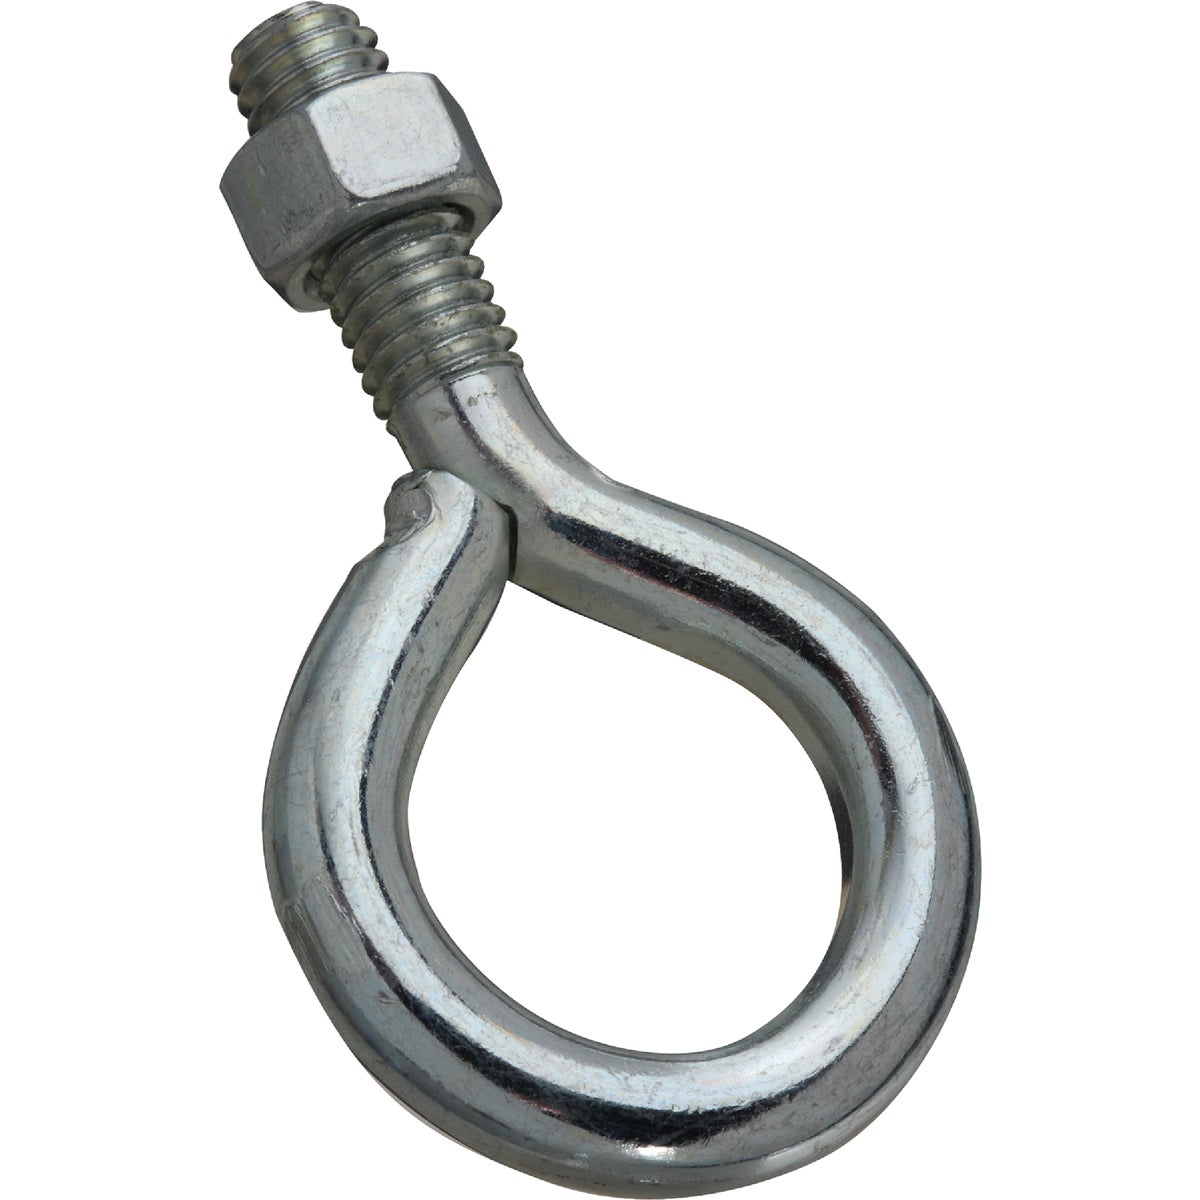 National 3/8 In. x 3 In. Zinc Eye Bolt with Hex Nut